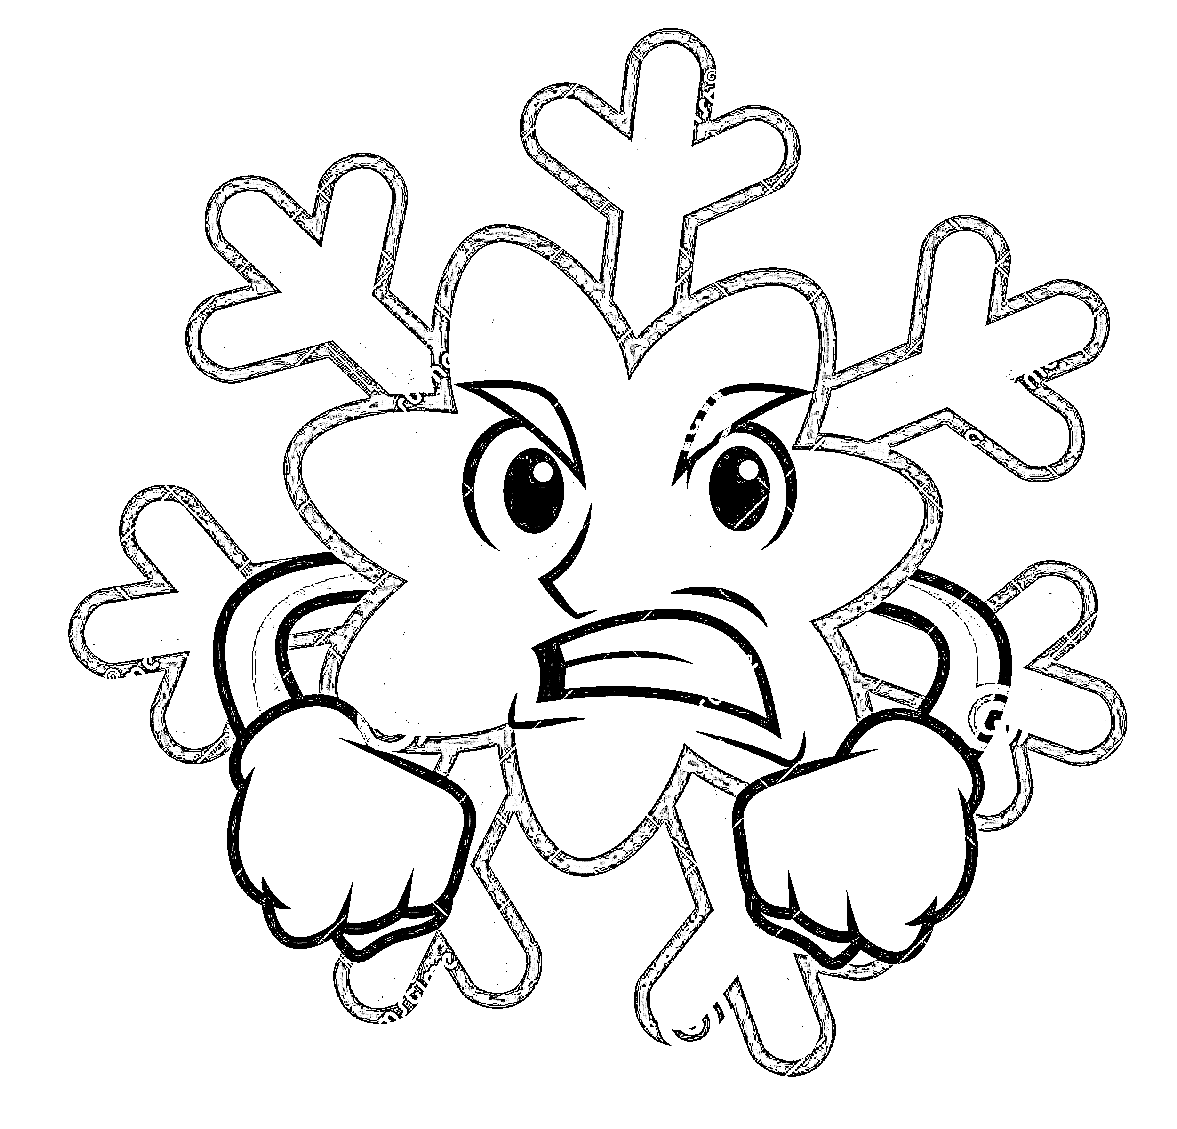 Angry Snowflake Coloring Page